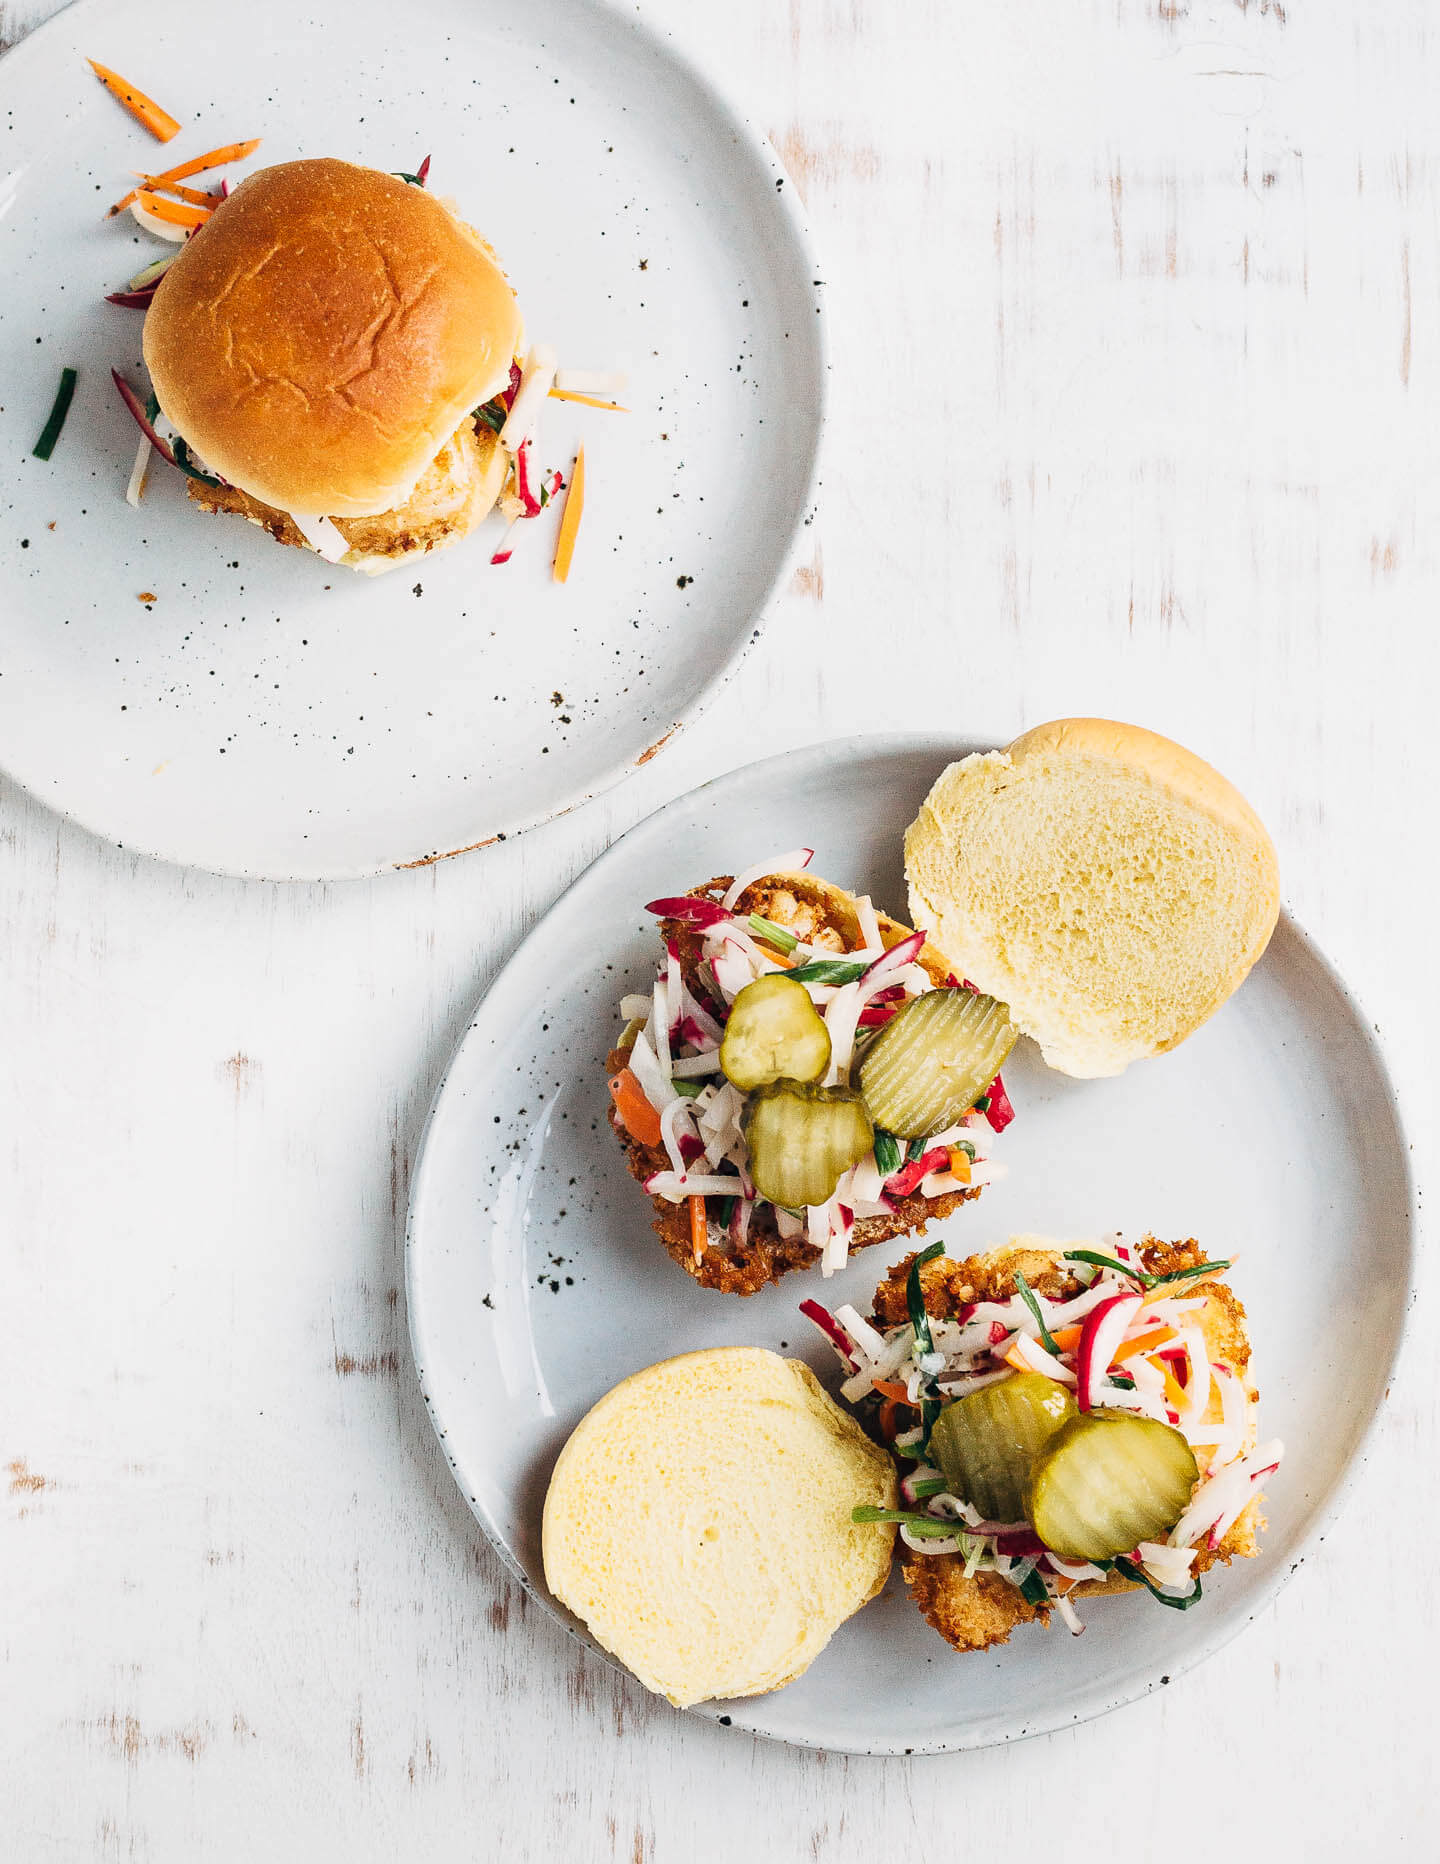 Panko-crusted fried fish sandwiches that are just right for a weeknight at home or a crowd-pleasing feast. Served with a simple radish slaw and bread and butter pickles, these flaky fish sandwiches hit all the right notes.